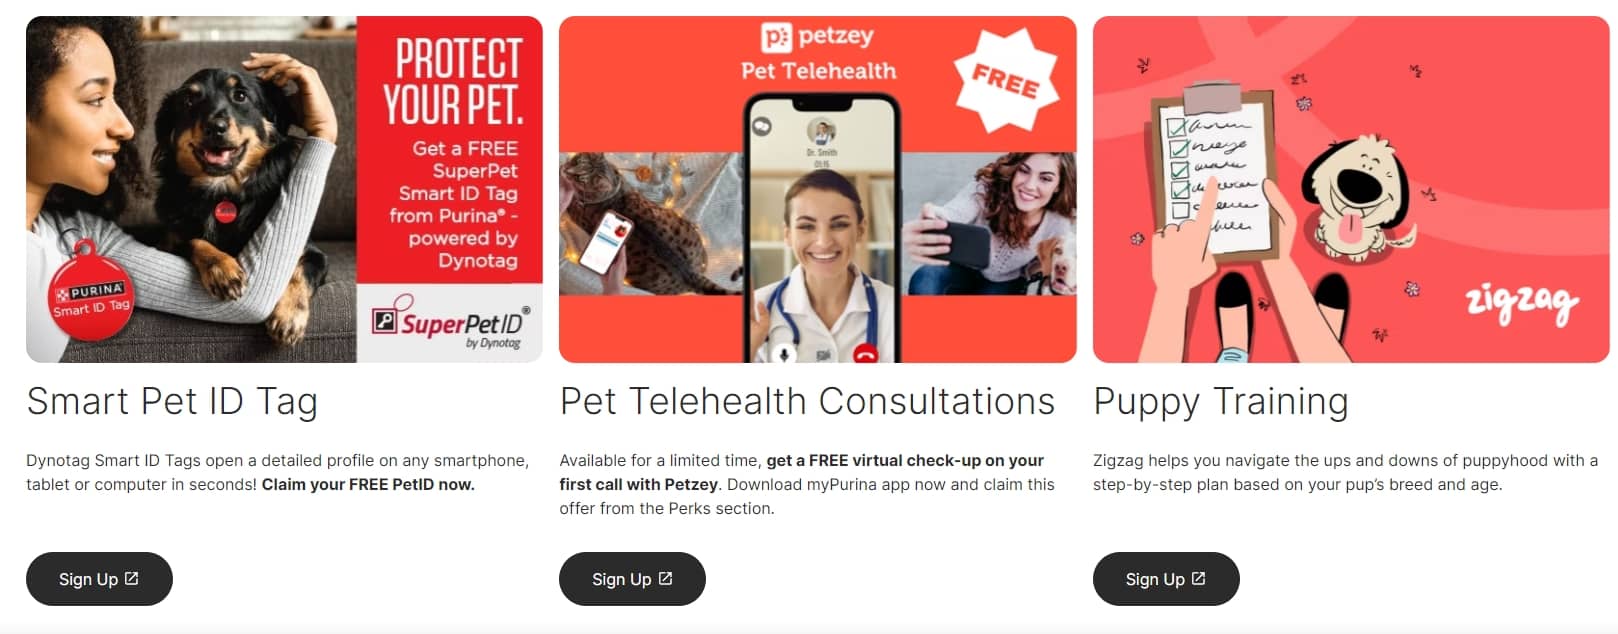 FREE Virtual Pet Check-Up with...